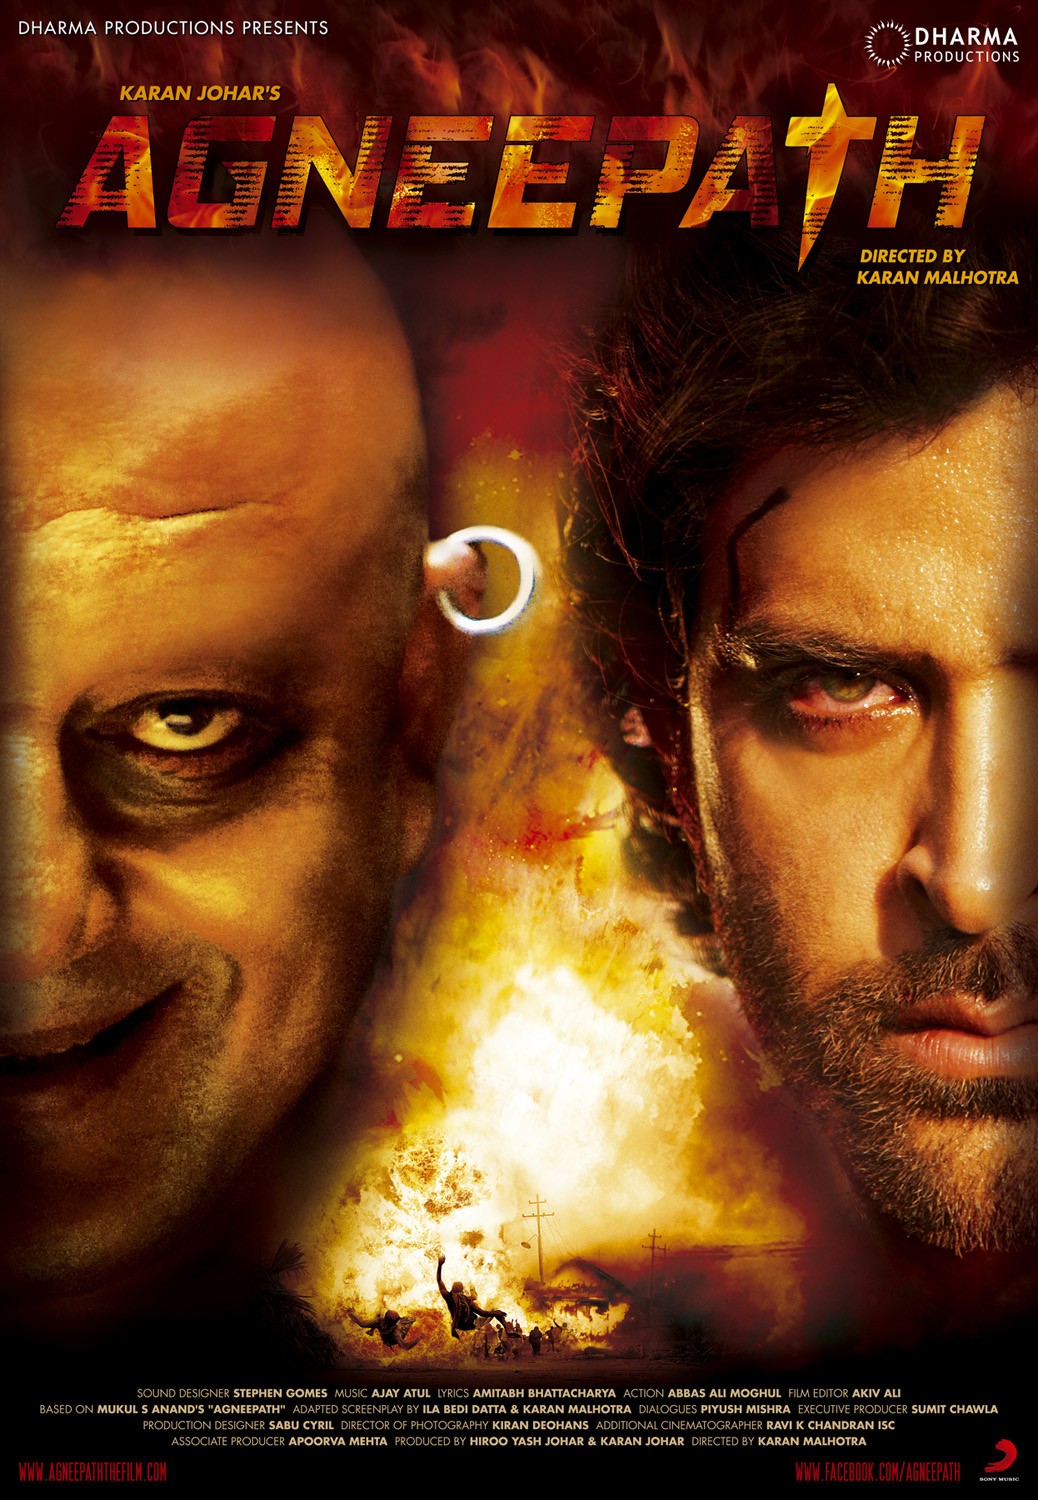 Extra Large Movie Poster Image for Agneepath (#4 of 6)